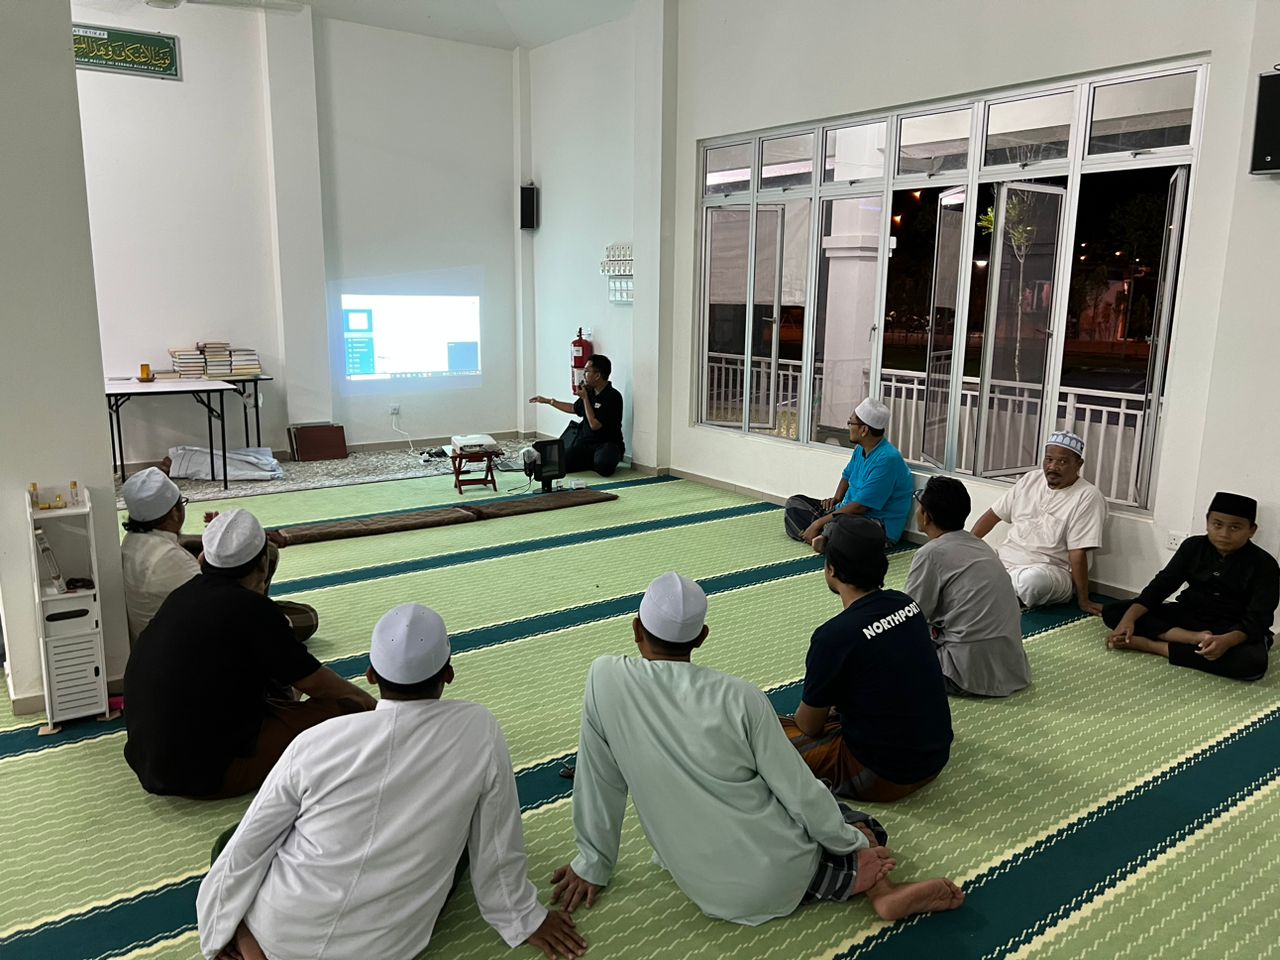 Cover image of Community Past Program: Community Apps – Presentation of Community Apps was conducted at Residensi Lubok Jong, Kelantan.